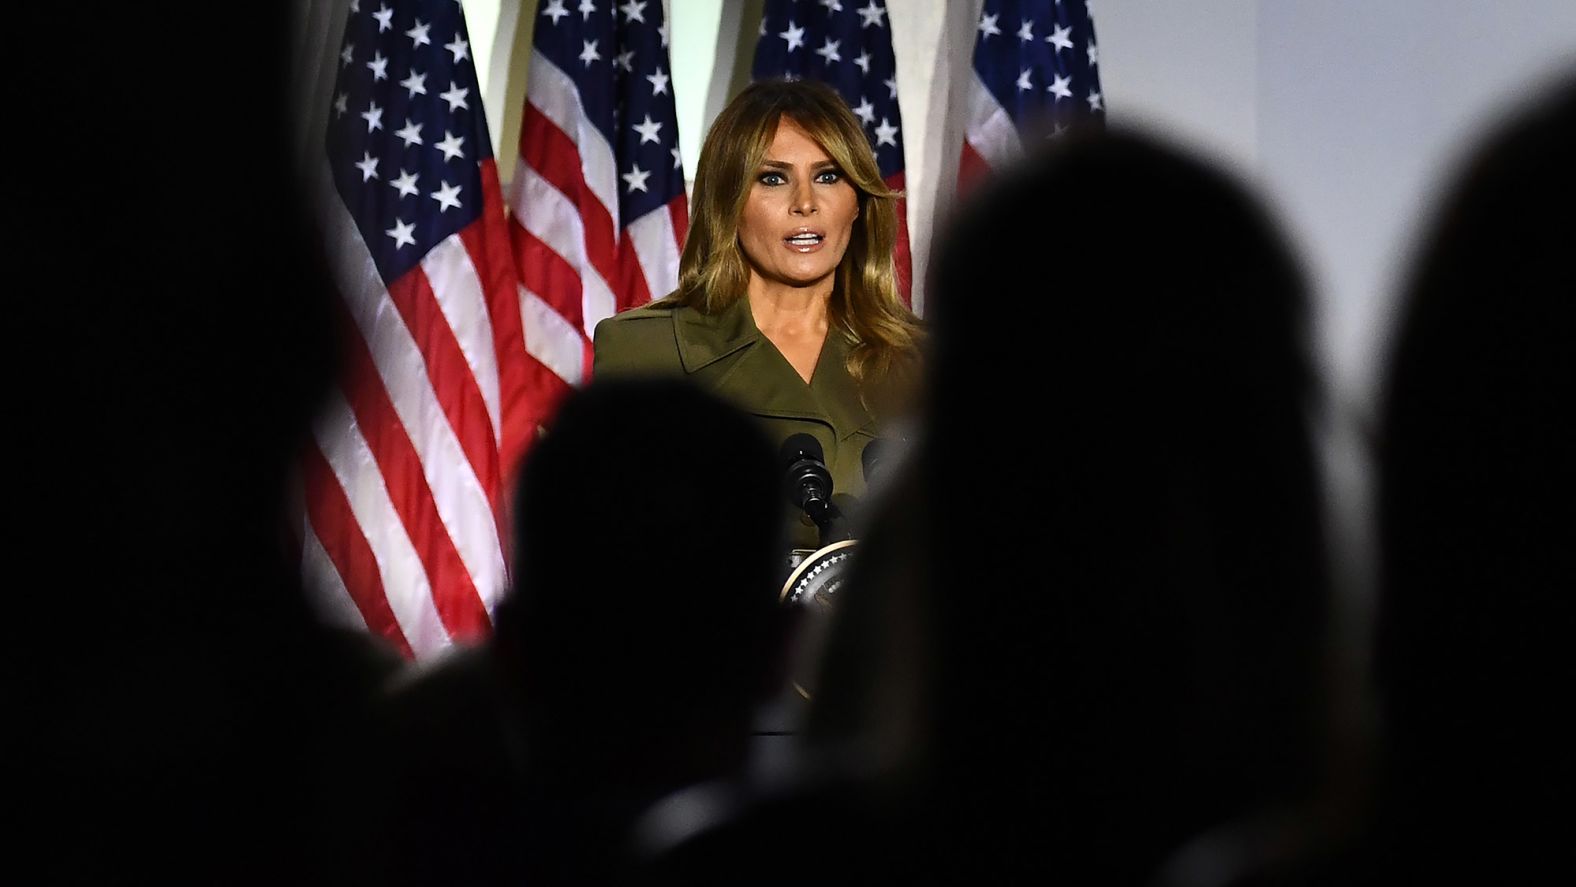 First lady Melania Trump, speaking Tuesday from <a href="https://www.cnn.com/2020/08/22/politics/melania-trump-rose-garden-restoration/index.html" target="_blank">the newly renovated White House Rose Garden,</a> sought to provide some comfort to families suffering during the coronavirus pandemic: "My deepest sympathy goes out to everyone who has lost a loved one, and my prayers are with those who are ill or suffering," <a href="https://www.cnn.com/politics/live-news/rnc-2020-day-2/h_b977ea6f0573d18b03123ee0836b237e" target="_blank">she said.</a> "I know many people are anxious and some feel helpless. I want you to know you are not alone."